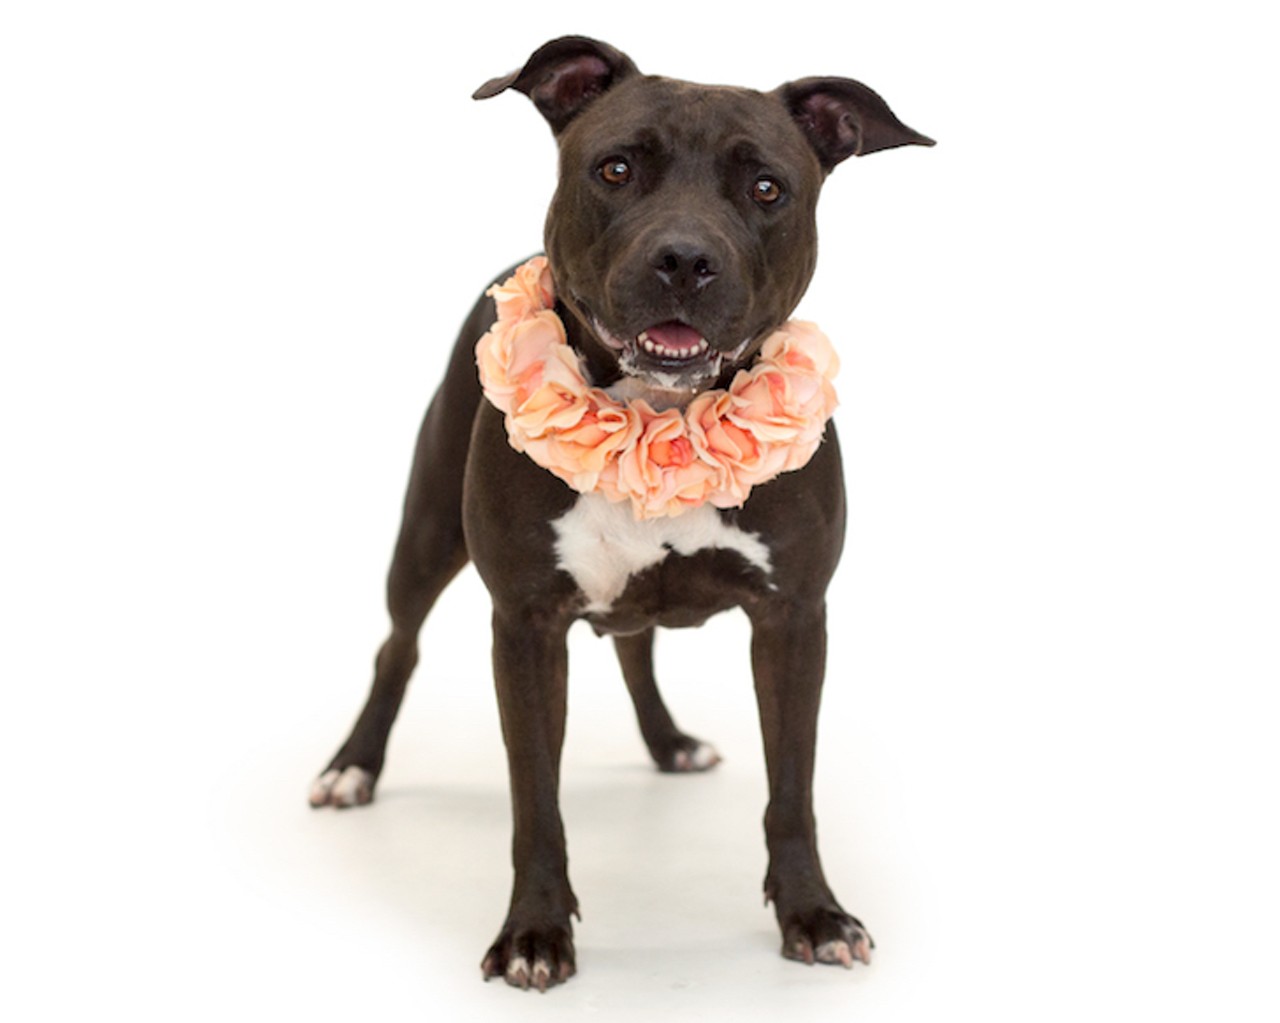 14 adoptable dogs waiting to meet you at Orange County Animal Services